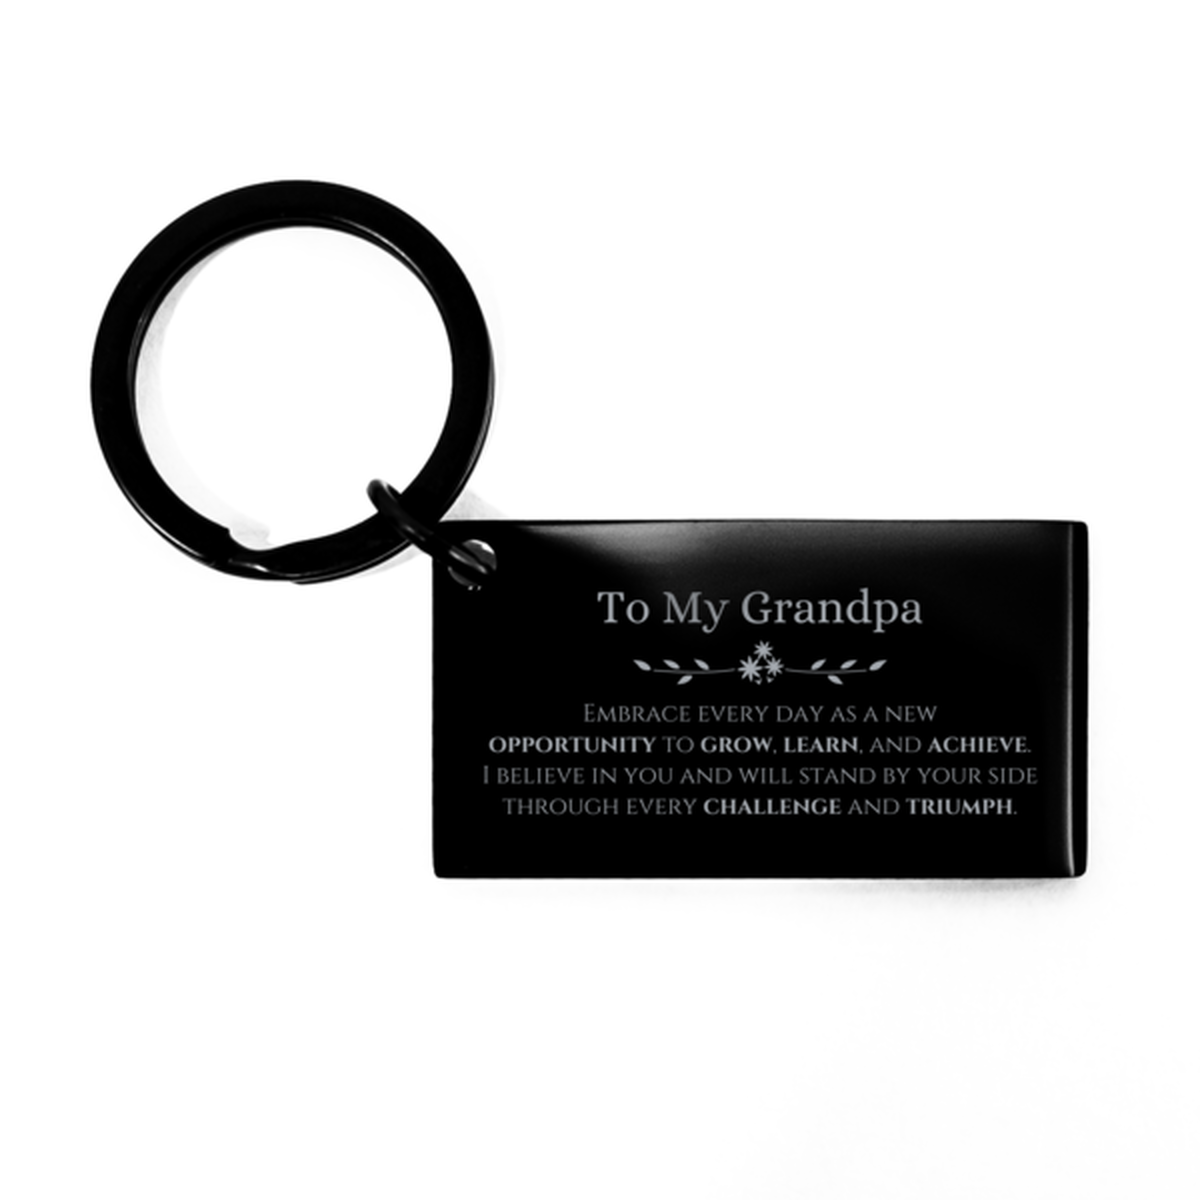 To My Grandpa Gifts, I believe in you and will stand by your side, Inspirational Keychain For Grandpa, Birthday Christmas Motivational Grandpa Gifts